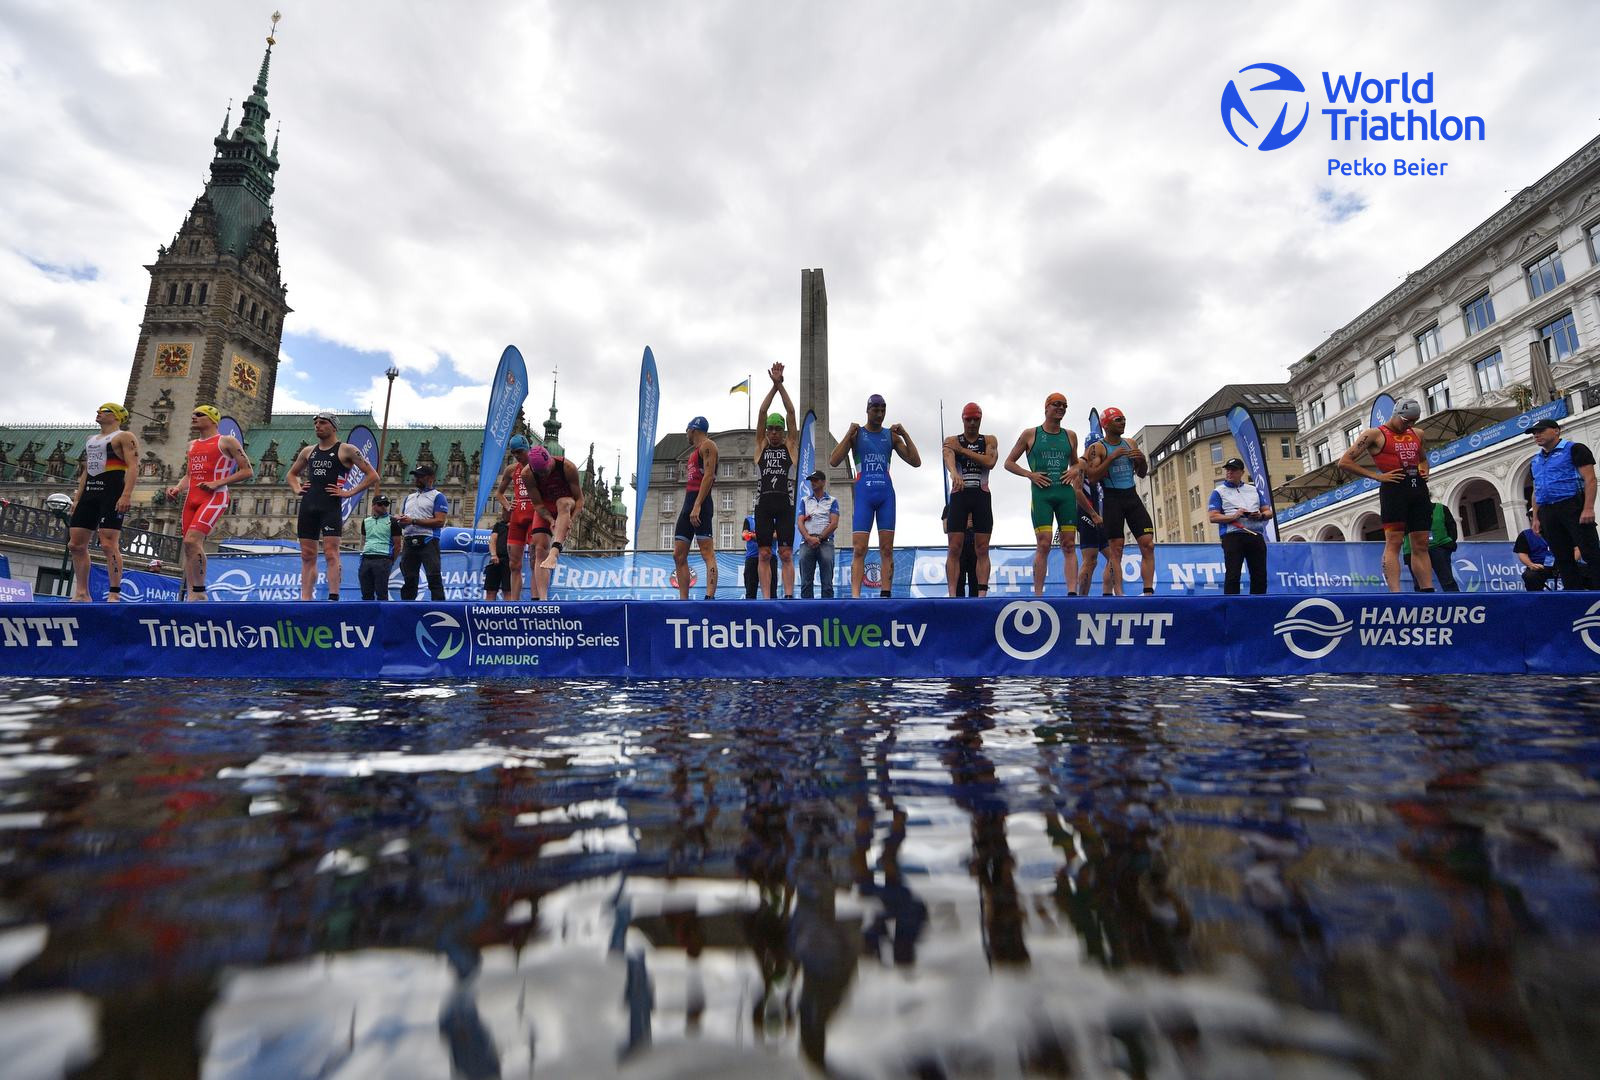 Athletes return to Hamburg for second time as chase for 2022 world title continues • World Triathlon